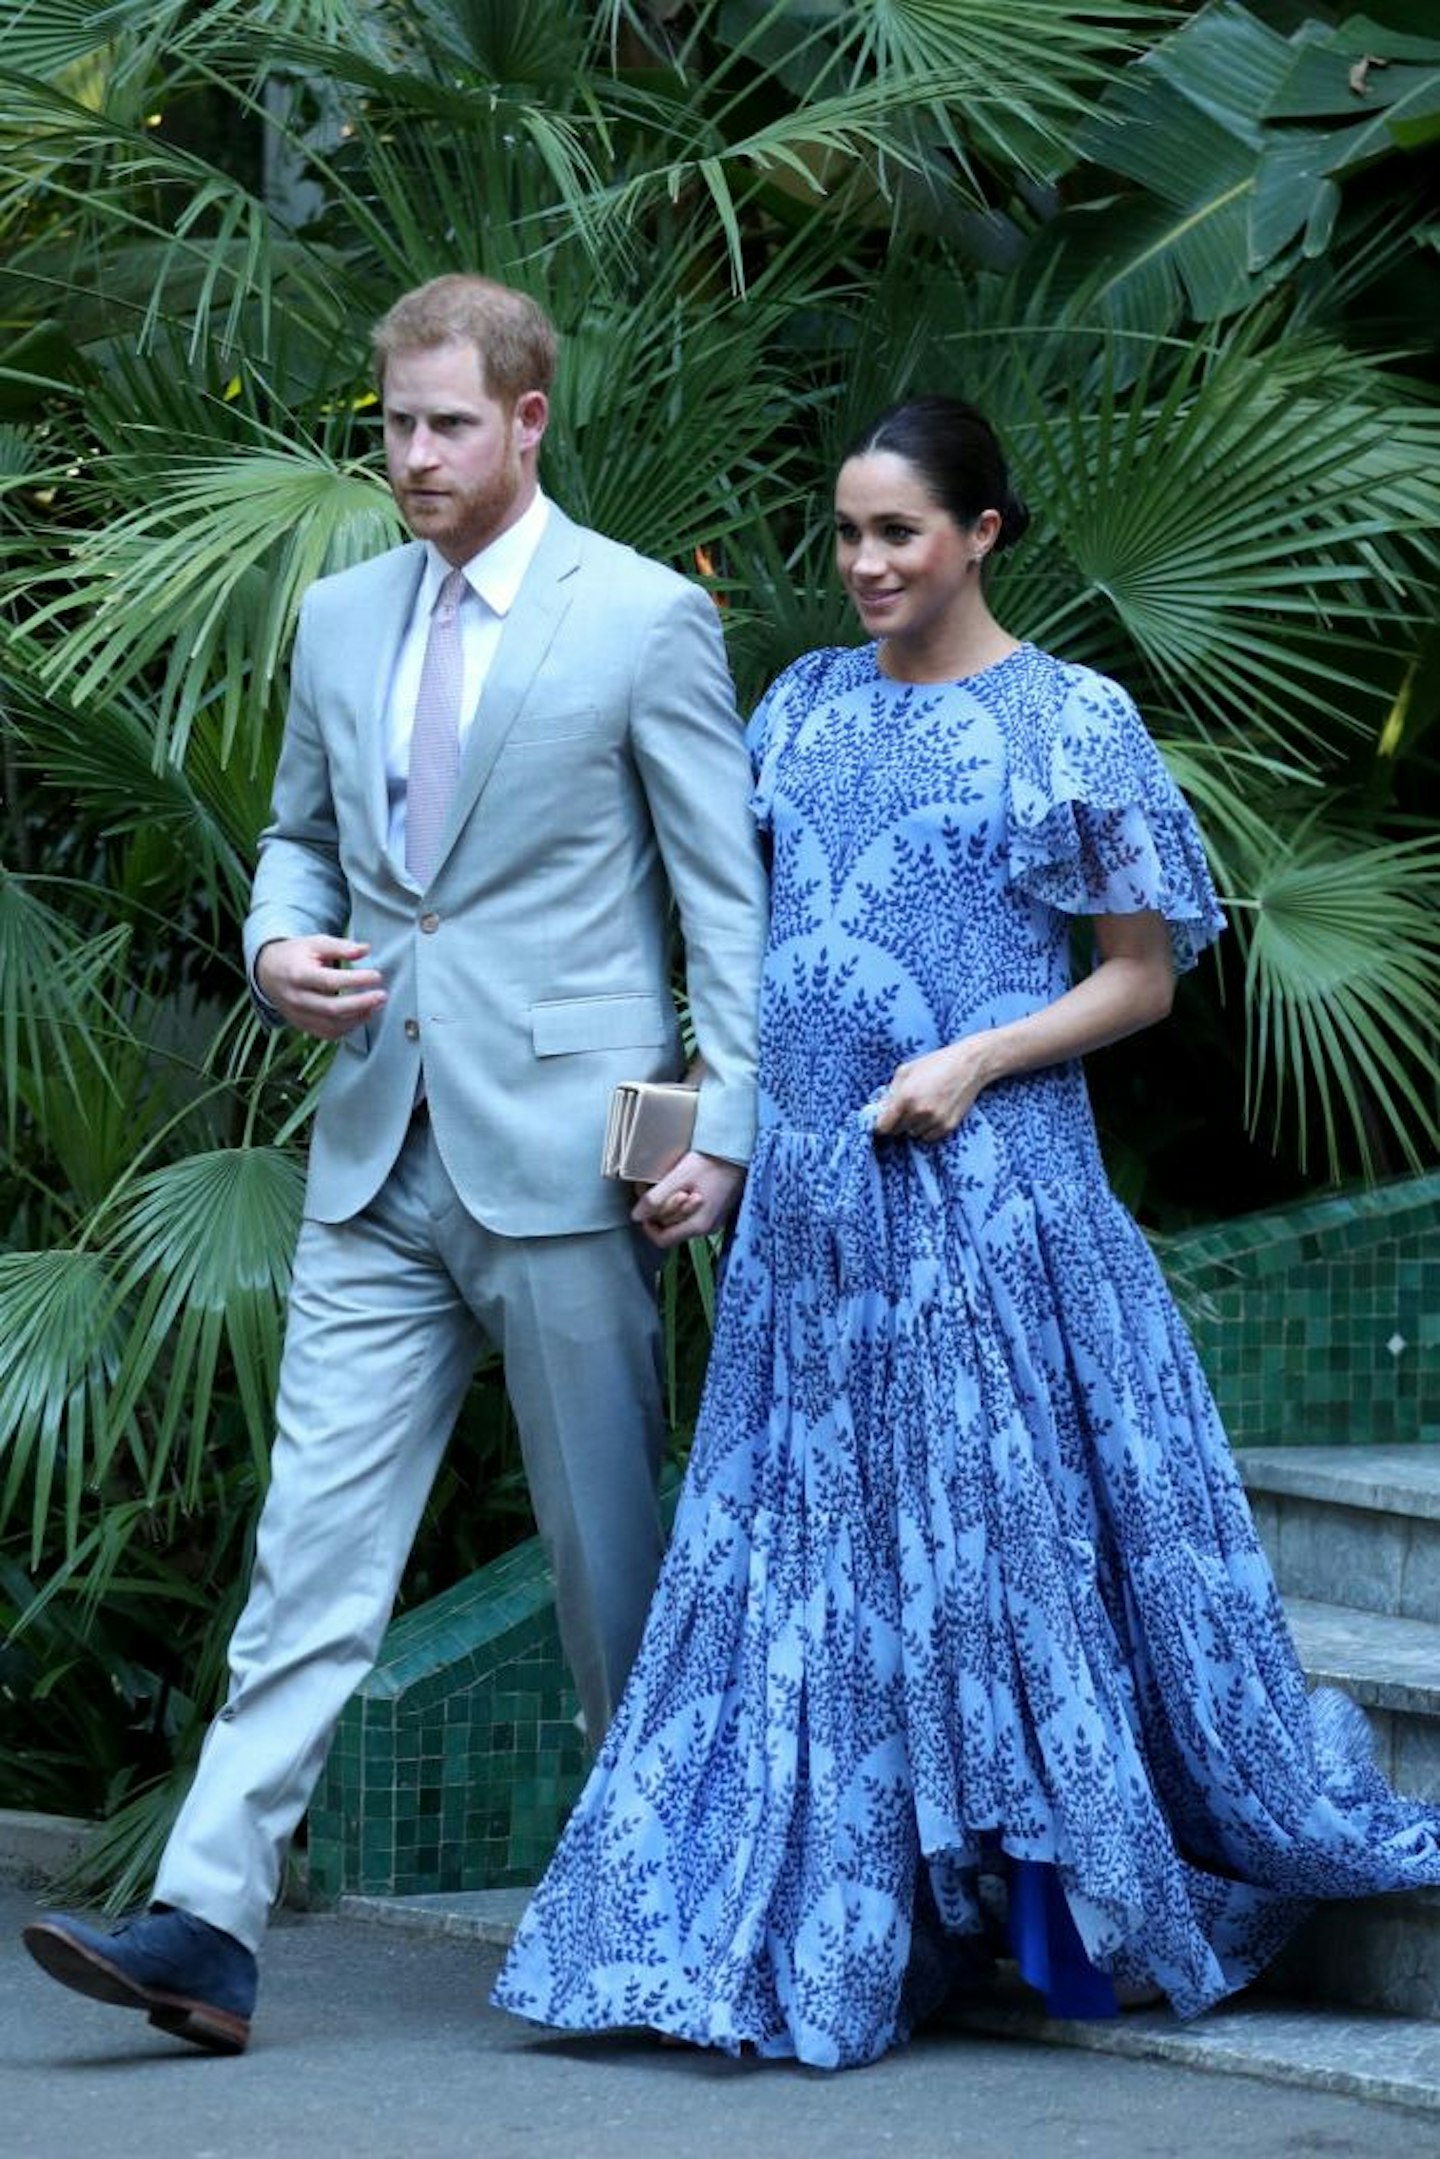 prince harry and Meghan Markle in blue floral dress